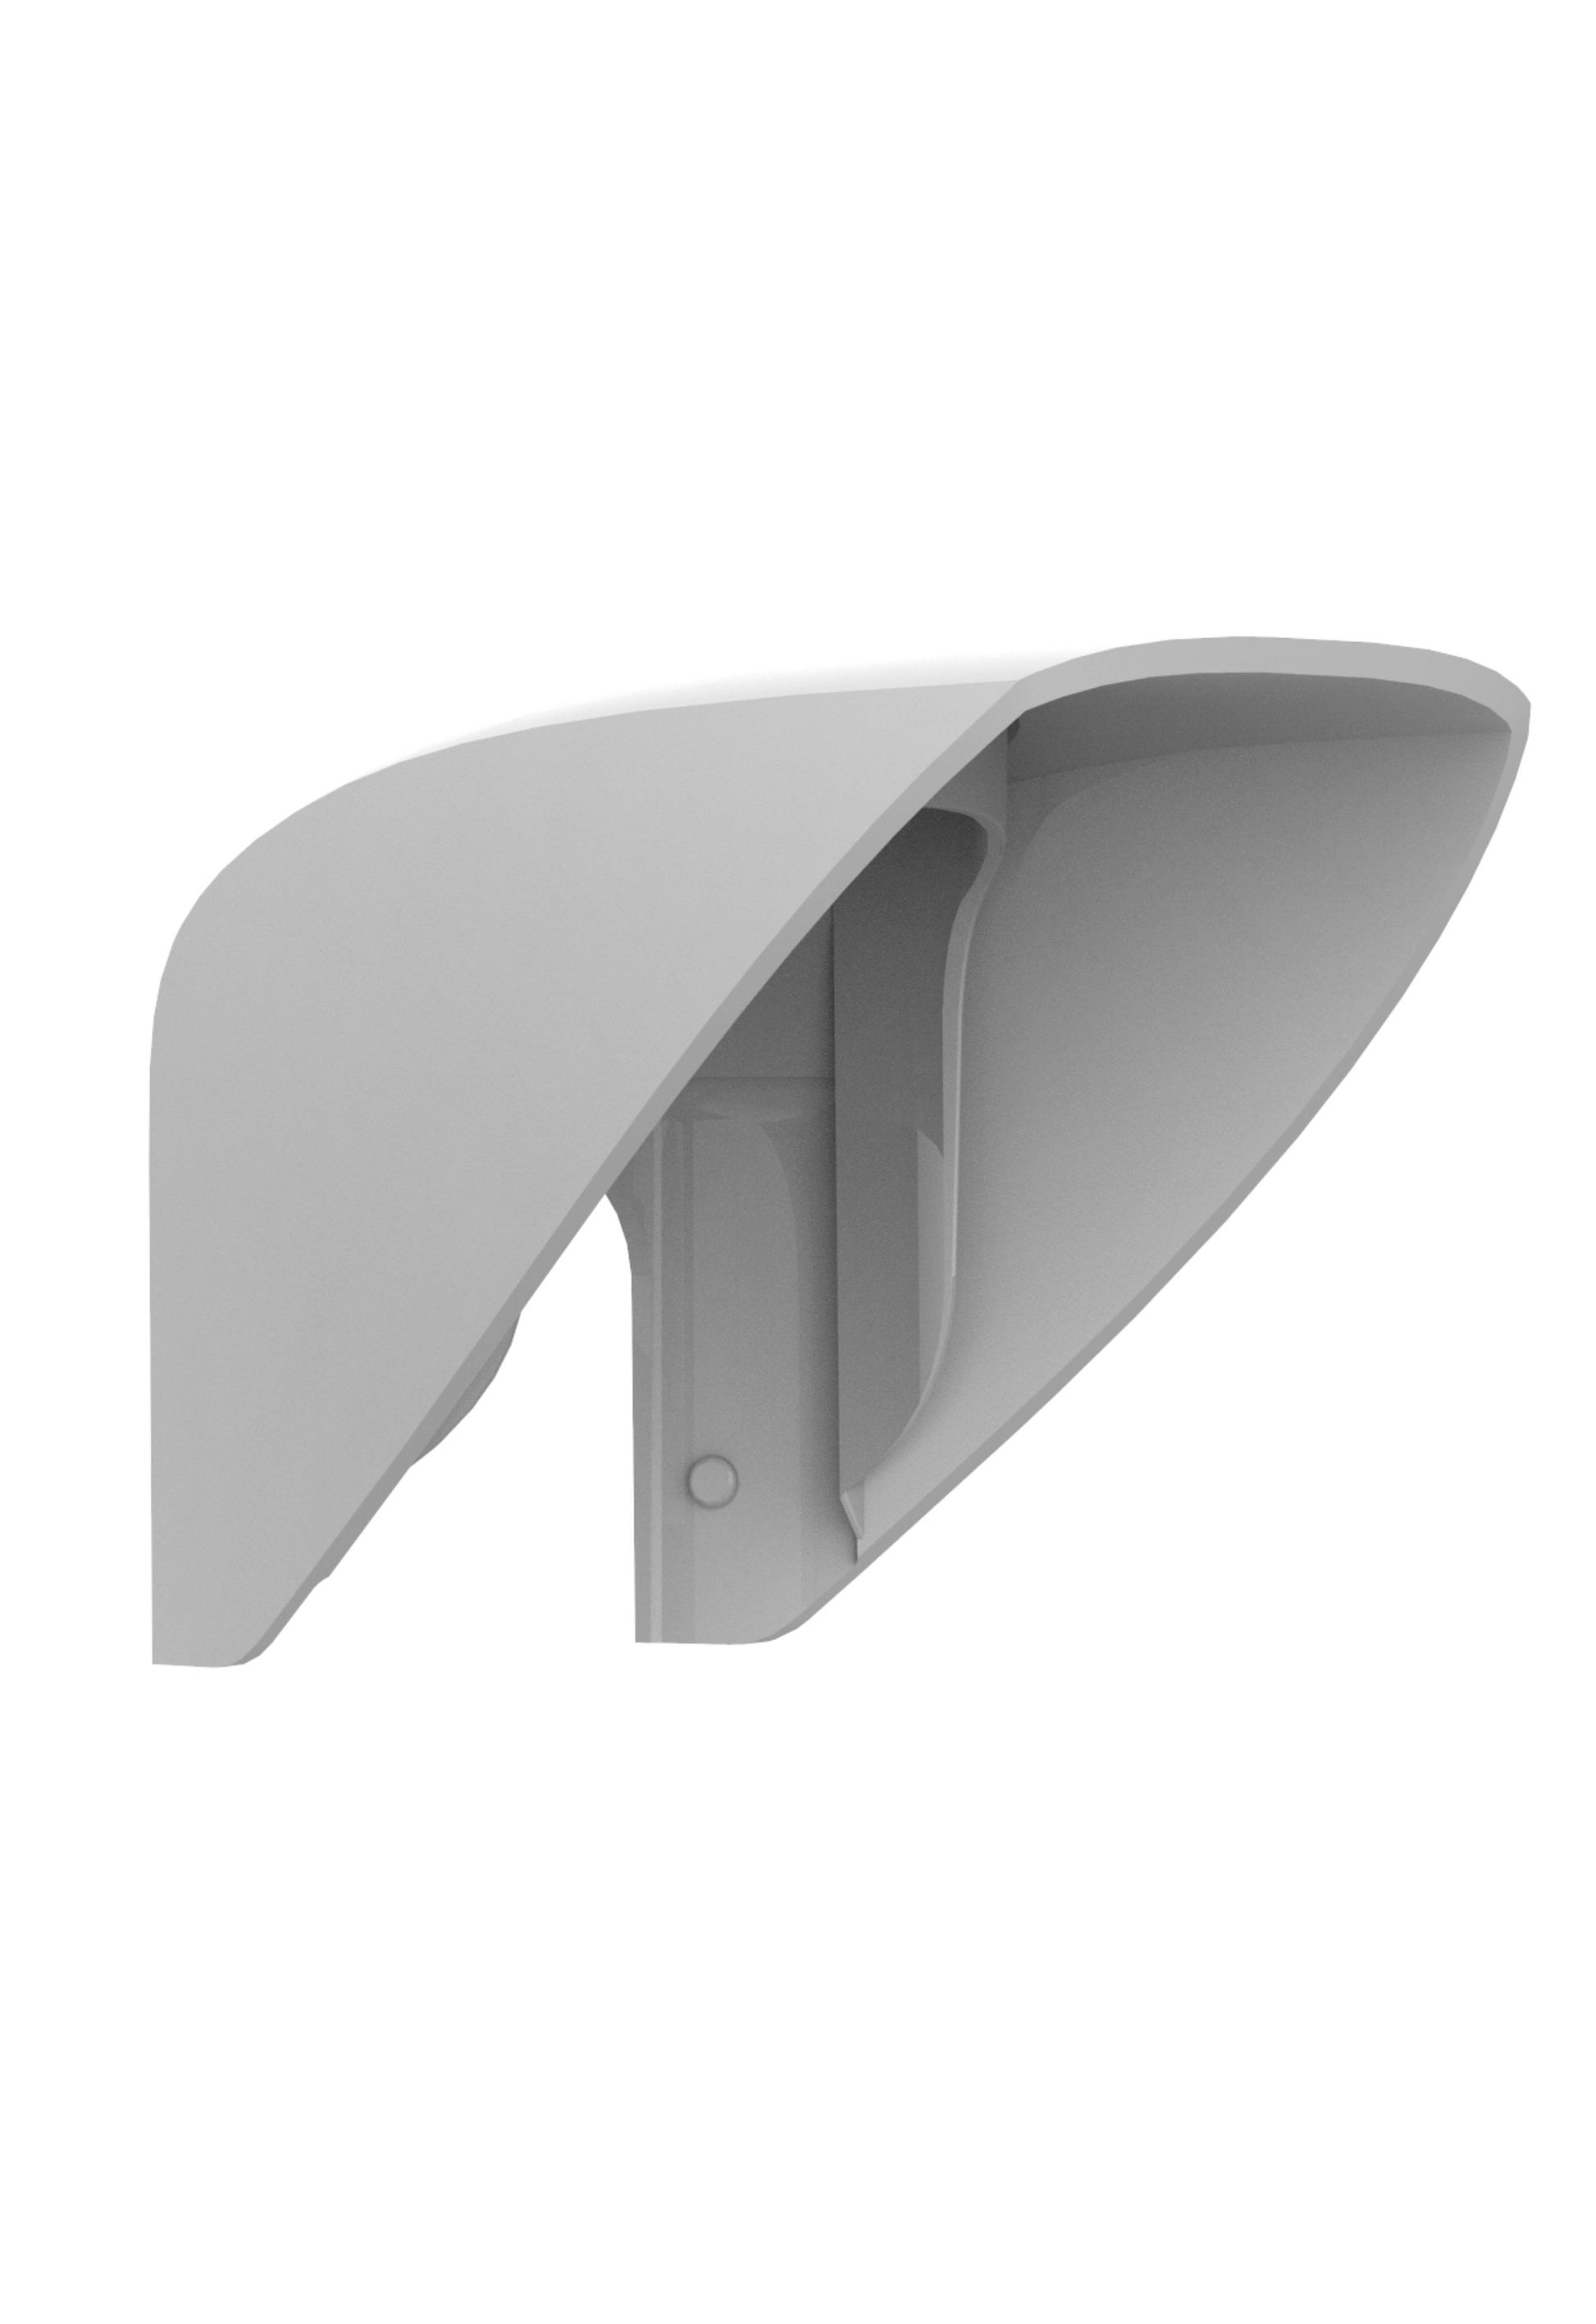 White Ajax hood for the Ajax MotionProtect outdoor motion detector, 110 × 96 × 90 mm in size. 71 g in weight. Made from Plastic , Side view of product